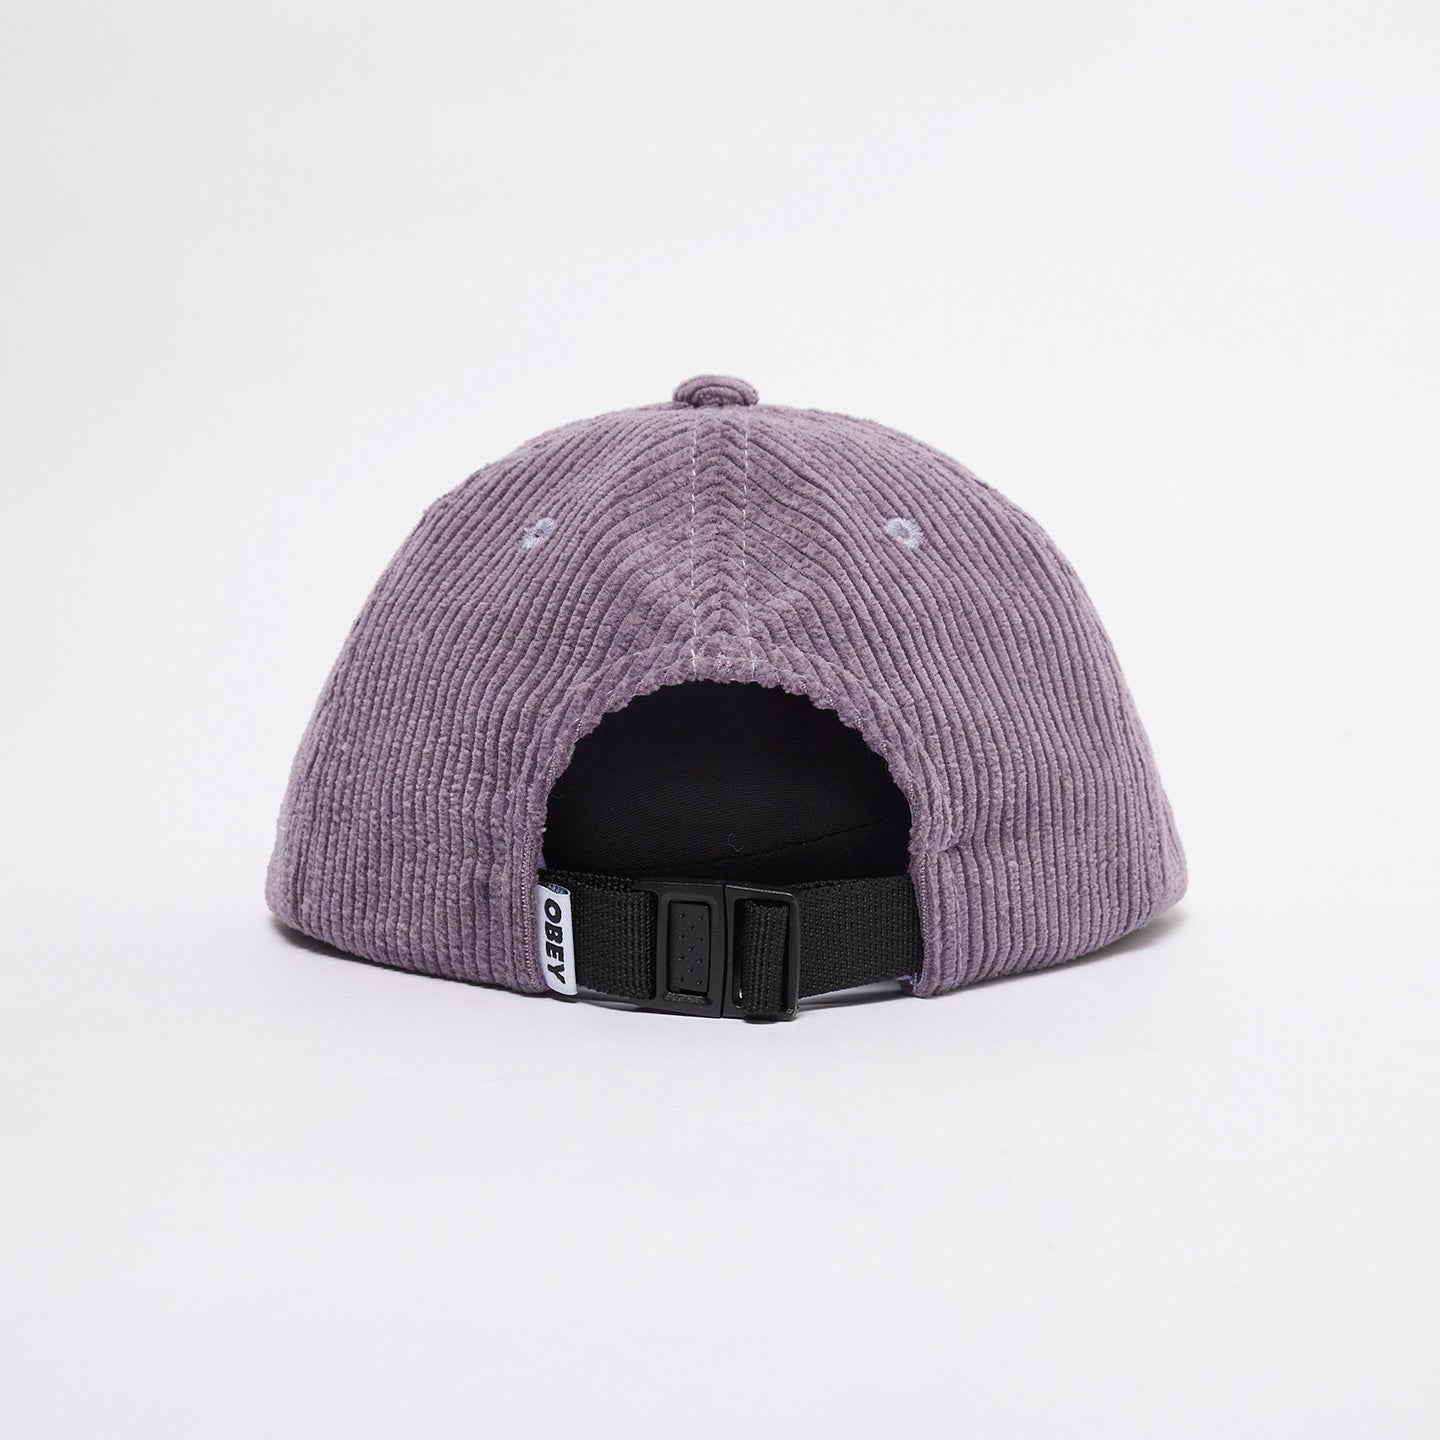 OBEY CORD LABEL 6 PANEL STRAP WINEBERRY